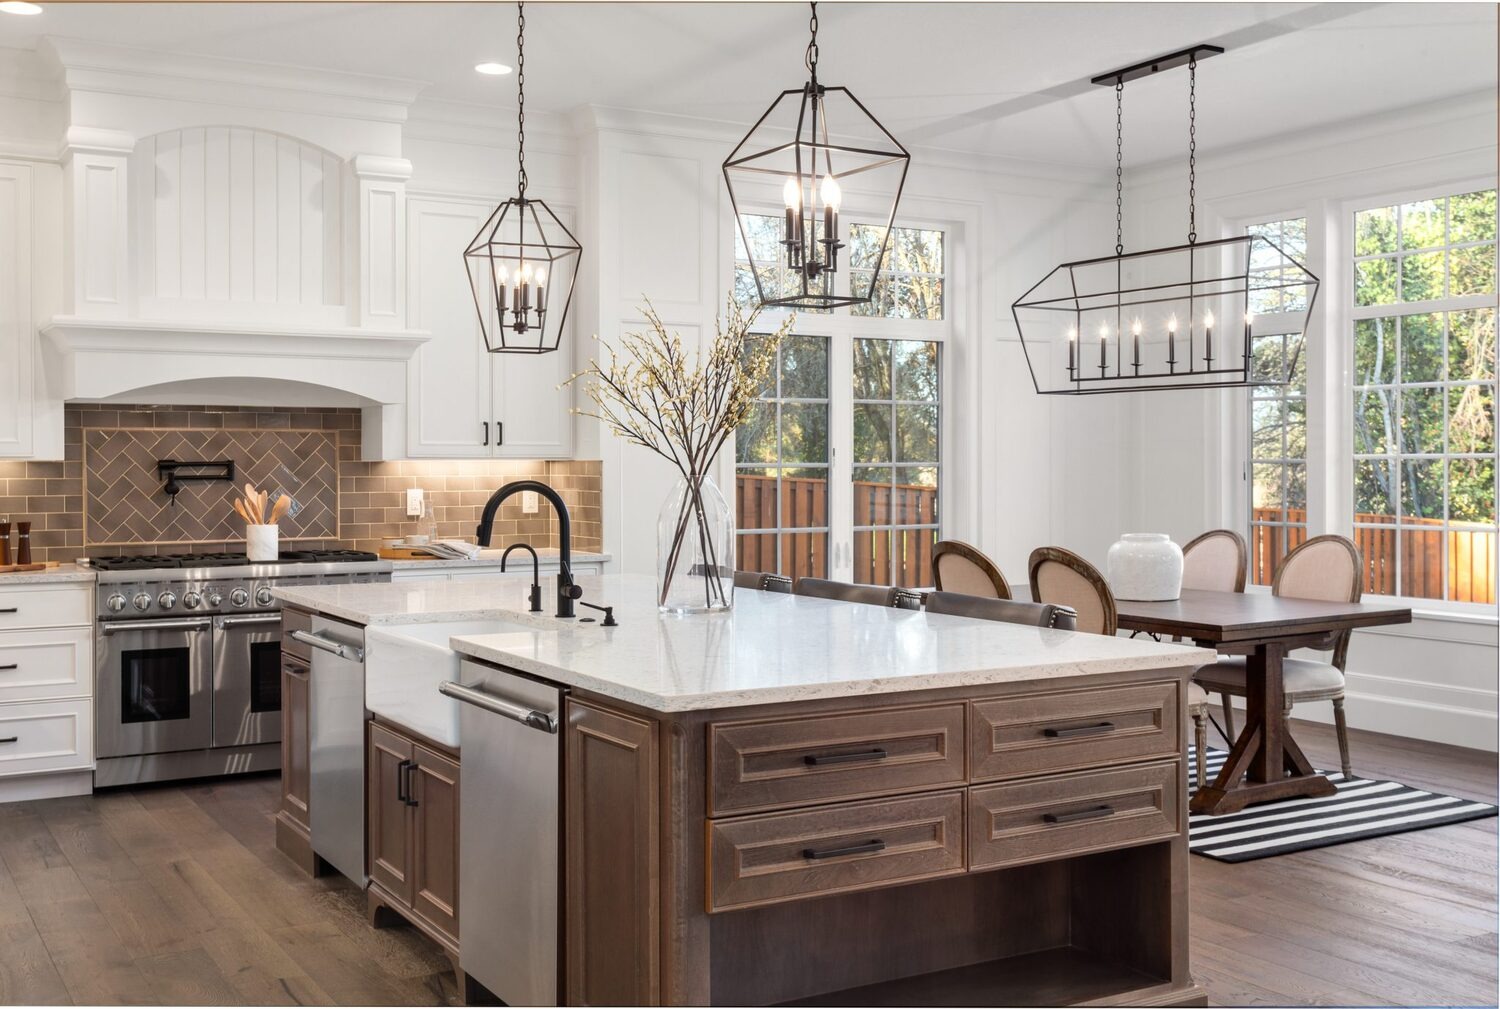 wooden white and brown, traditional kitchen after the kitchen remodeling Highland Park project